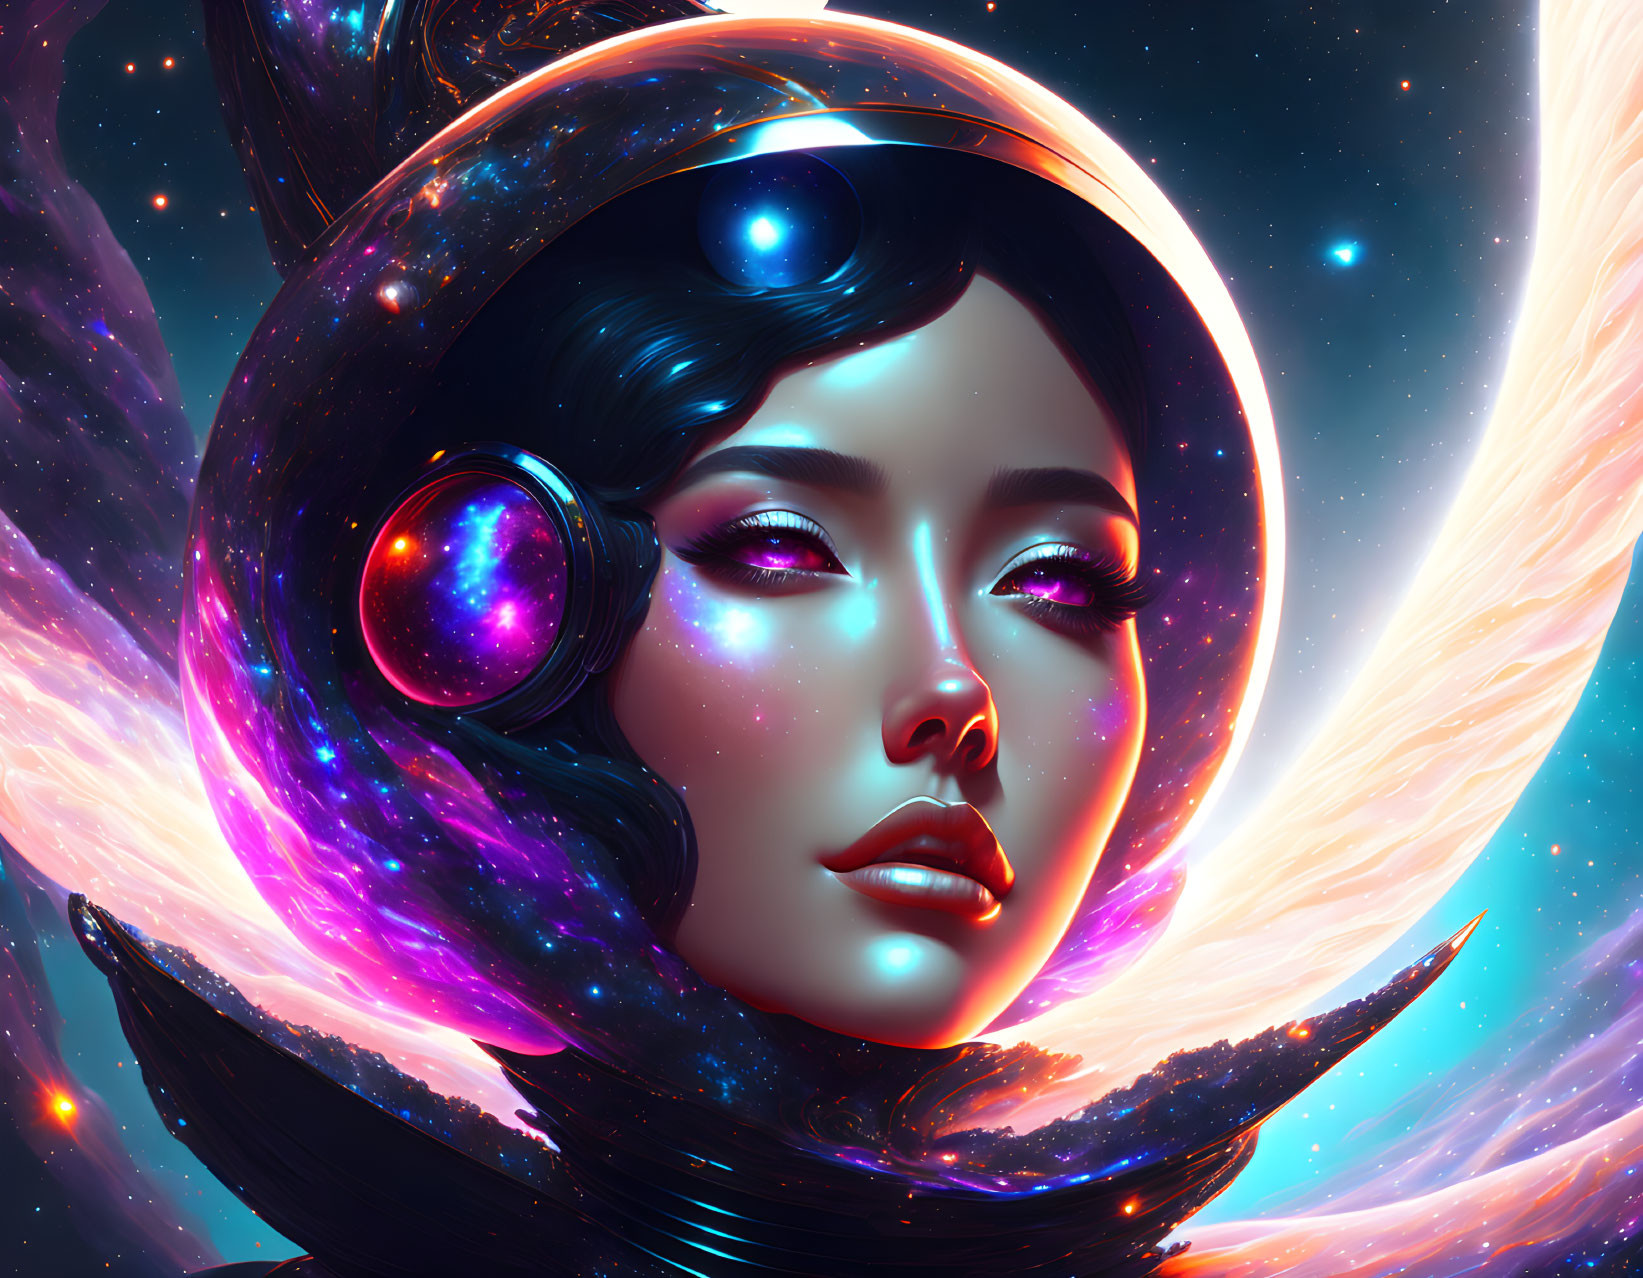 Digital artwork of woman with cosmic features in futuristic helmet against vibrant nebula.